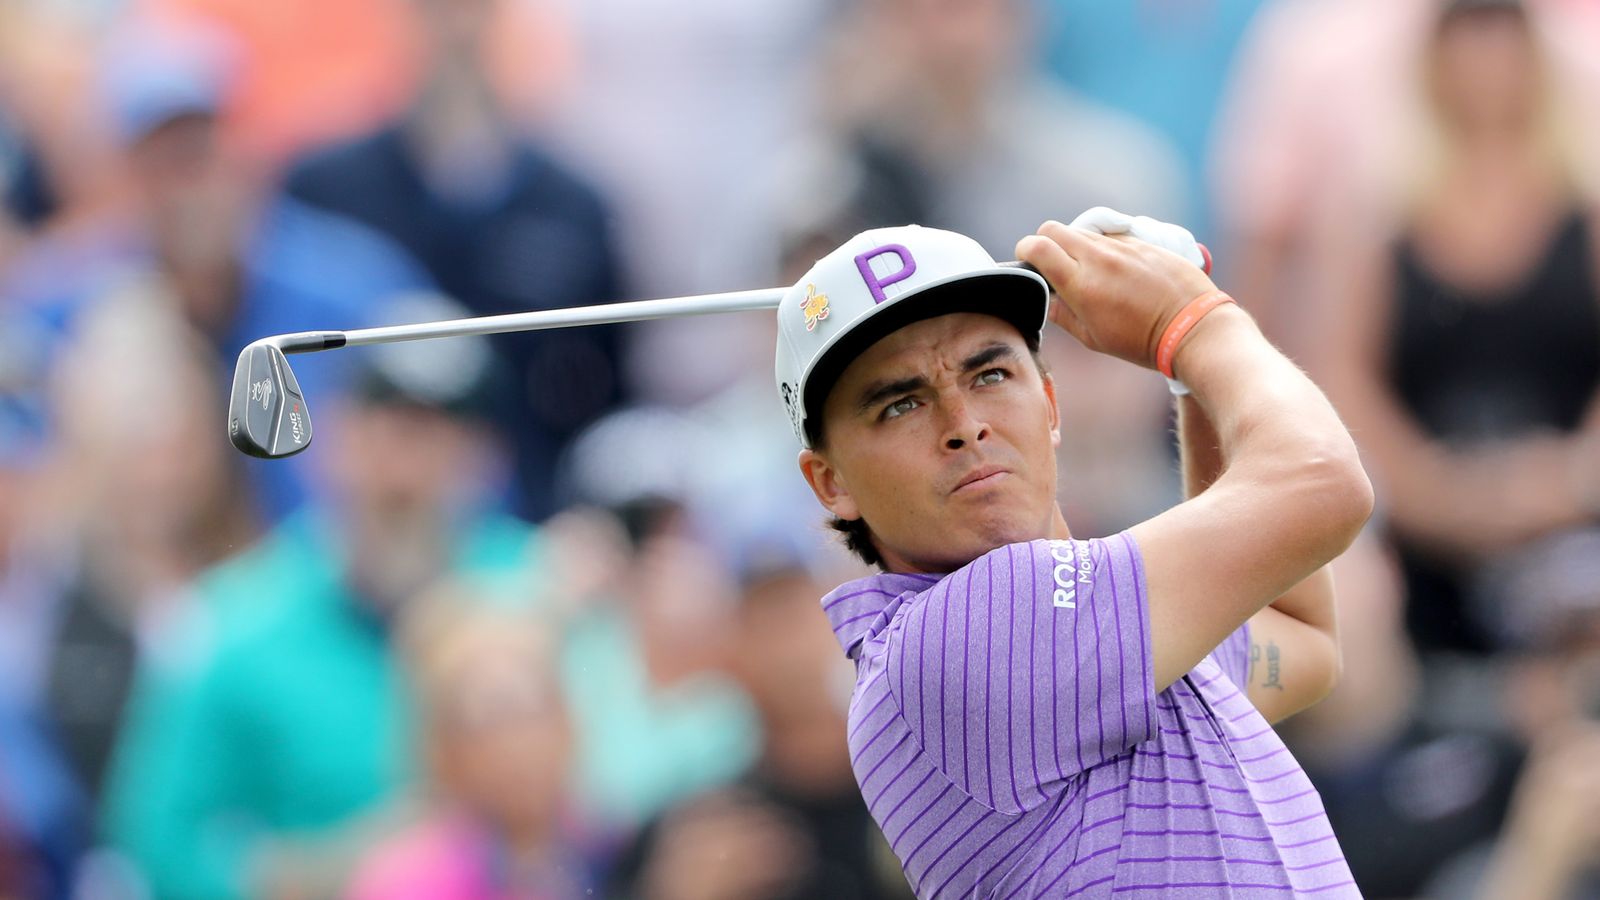 Rickie Fowler playing Texas Open to prepare for major bid at Masters